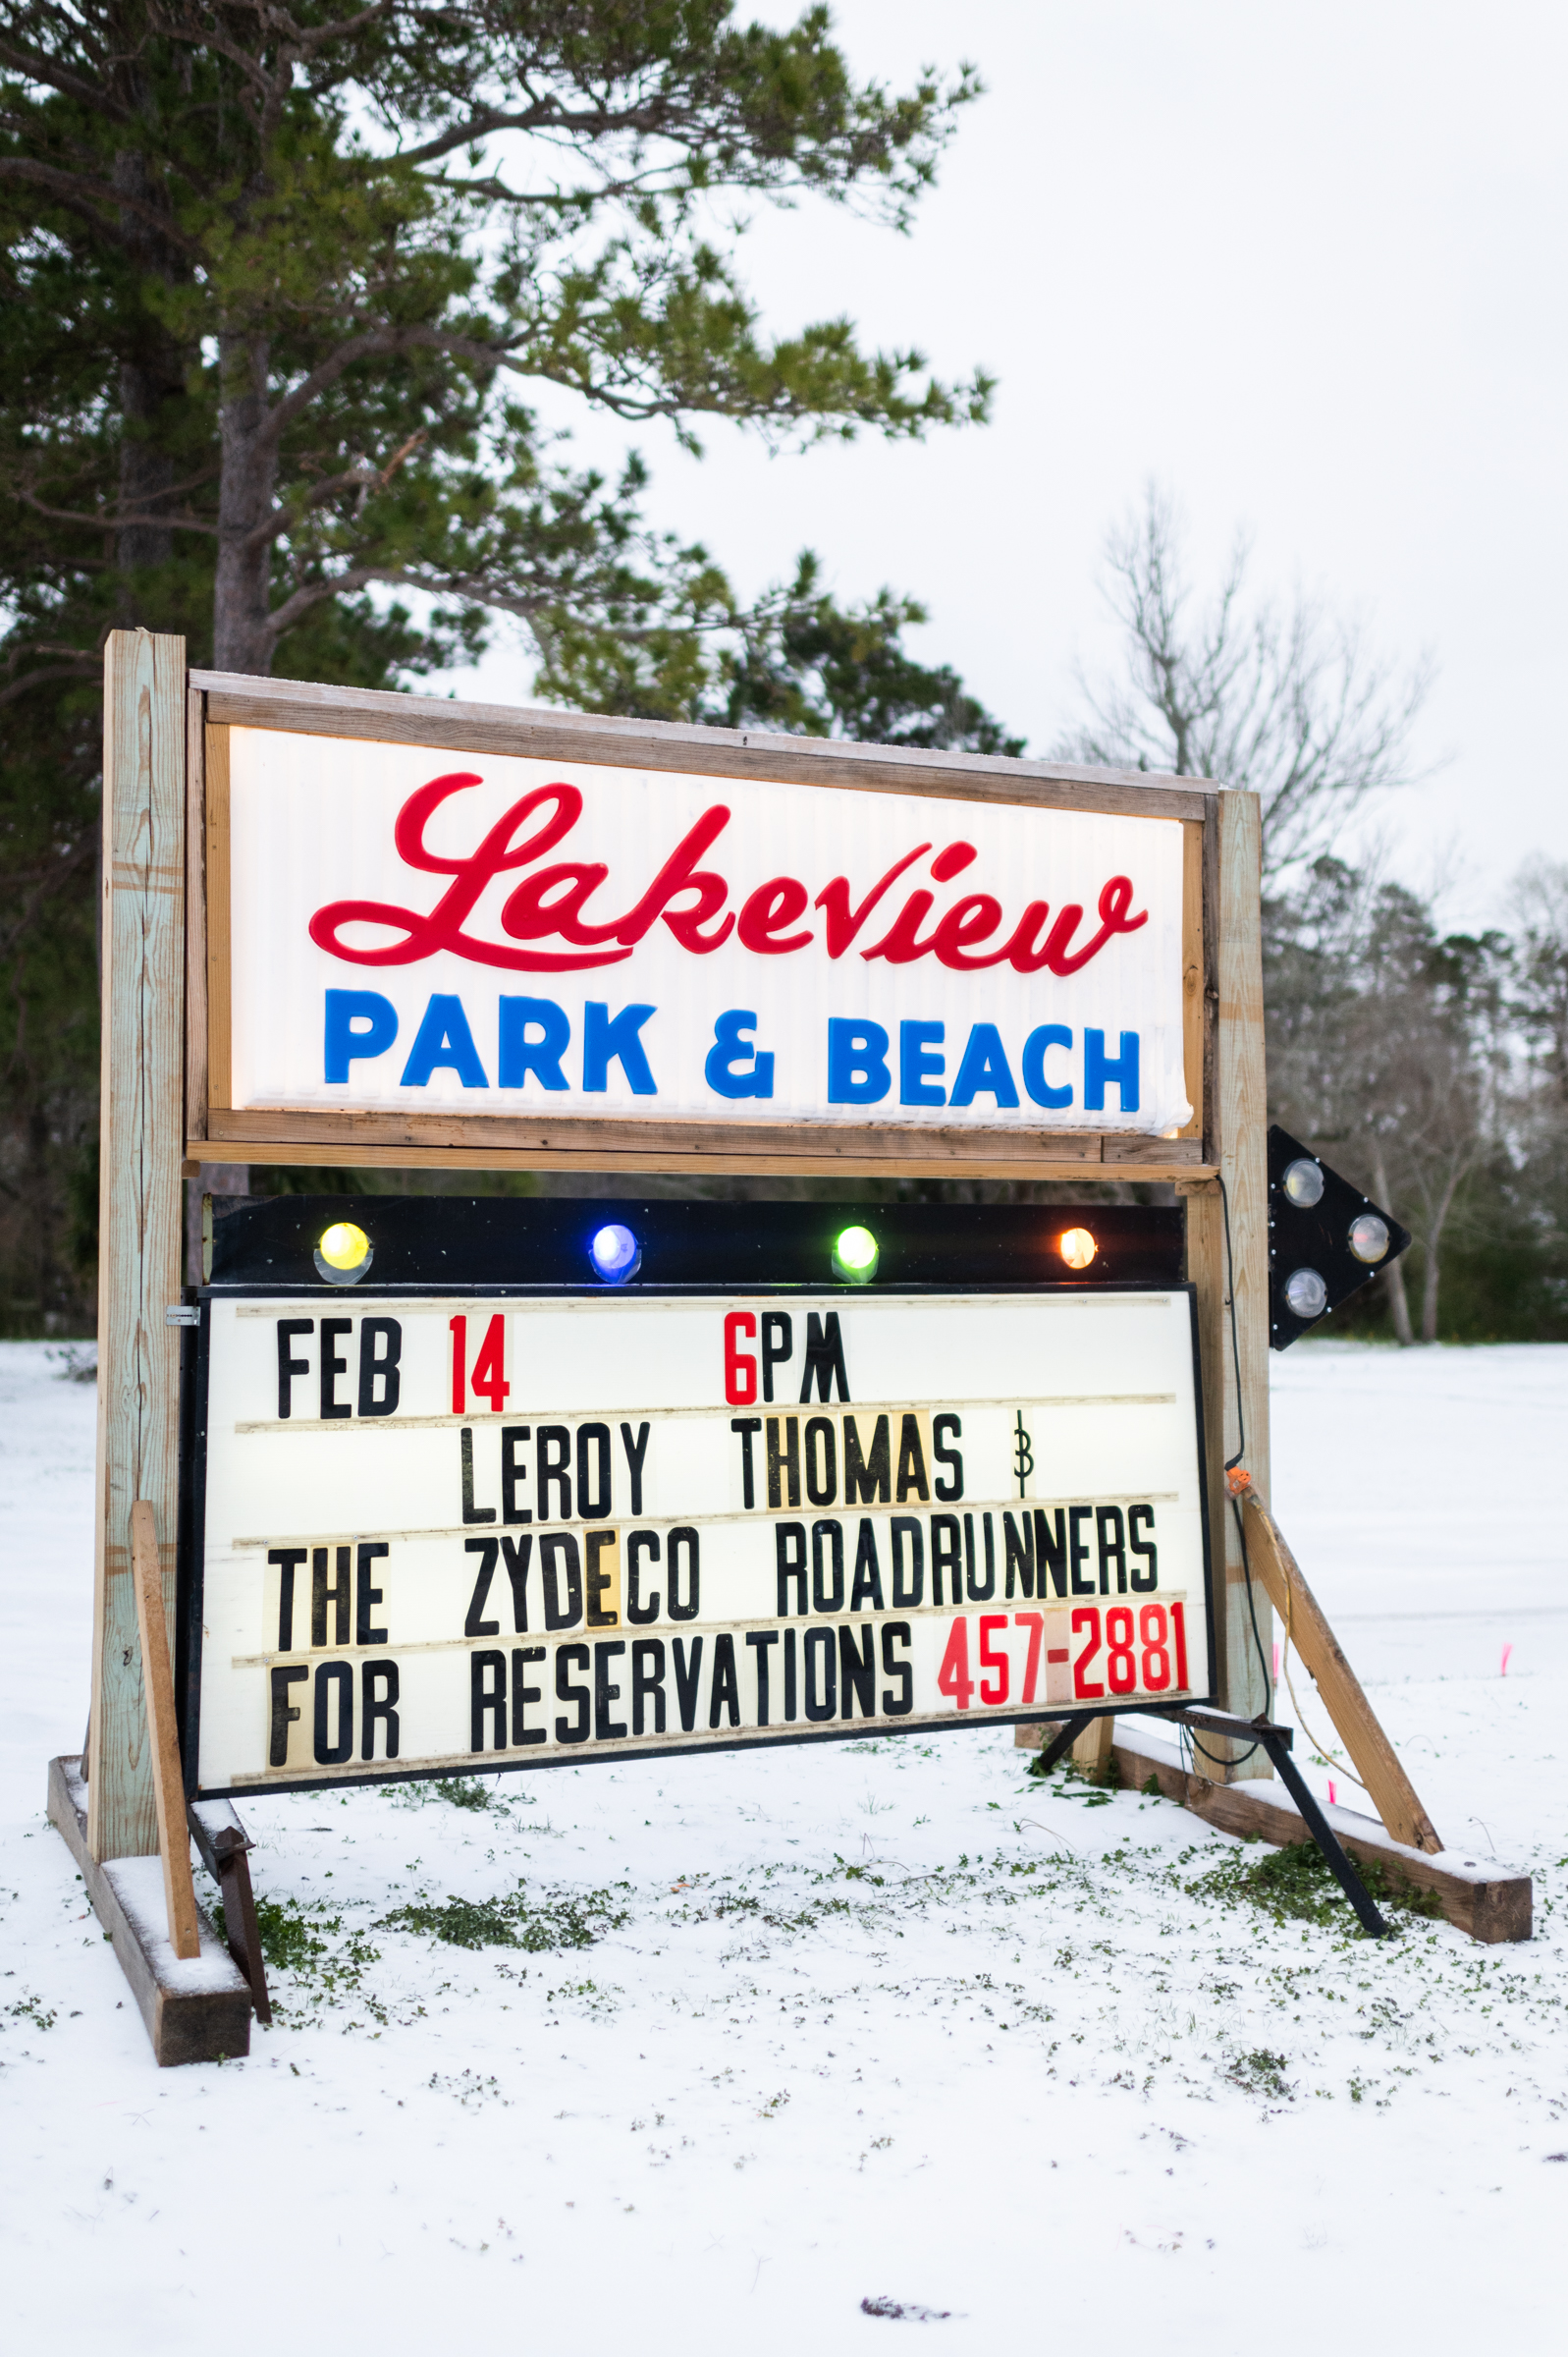 The welcome sign at Lakeview Park & Beach near Eunice, Louisiana